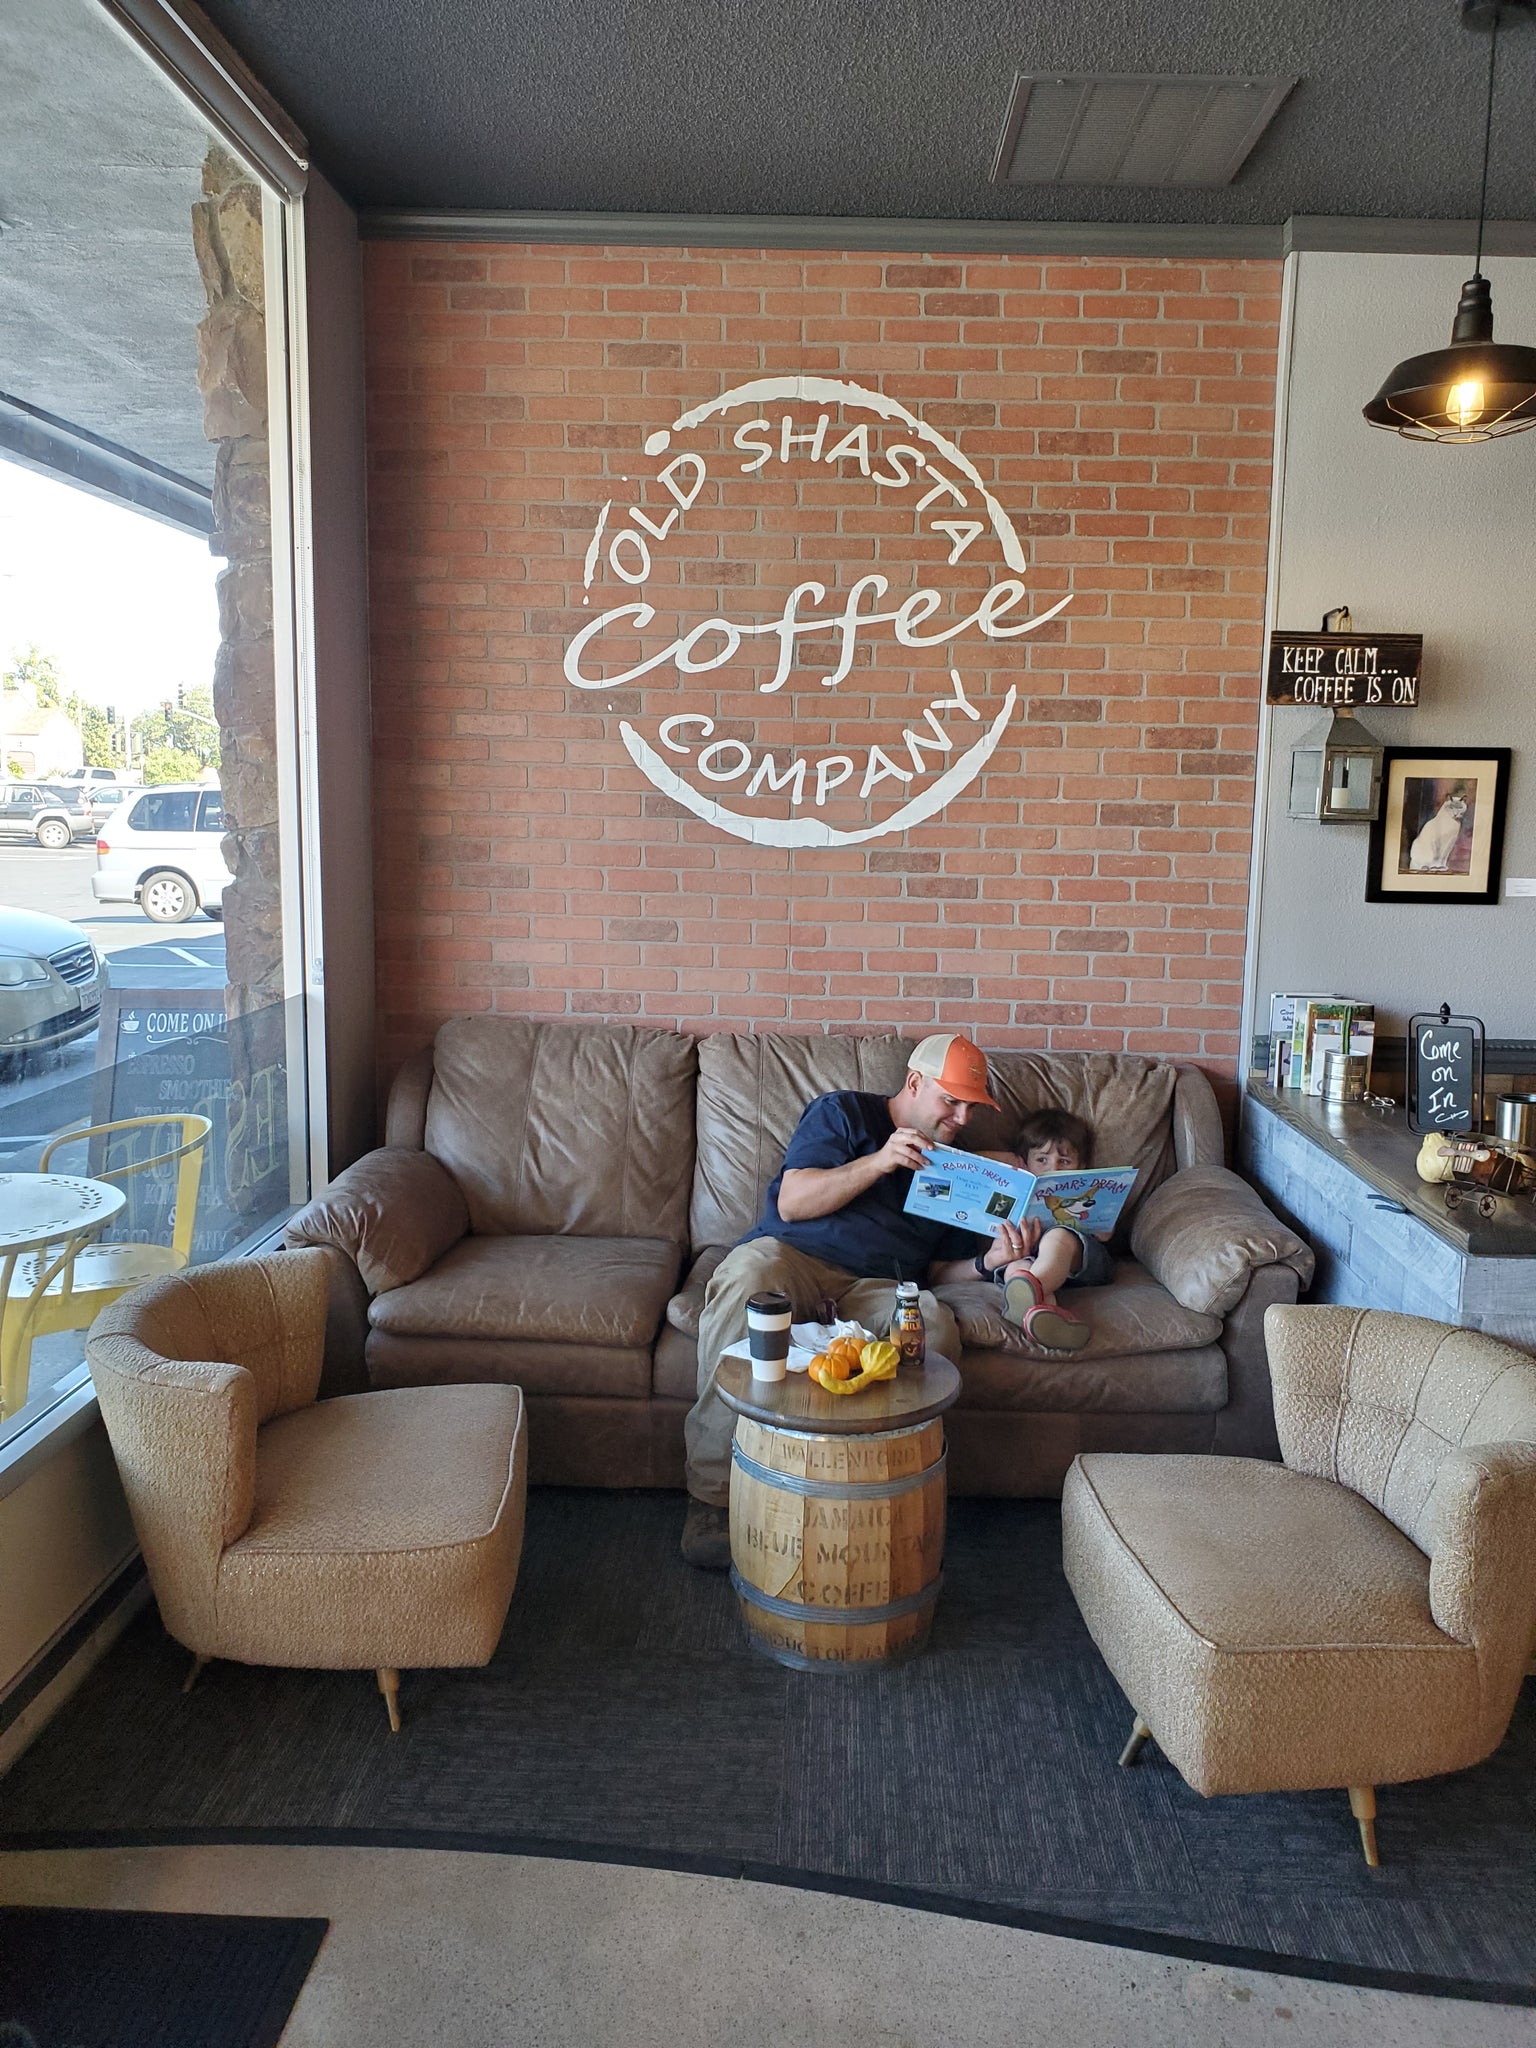 Father and son hanging out at Old Shasta Coffee Company